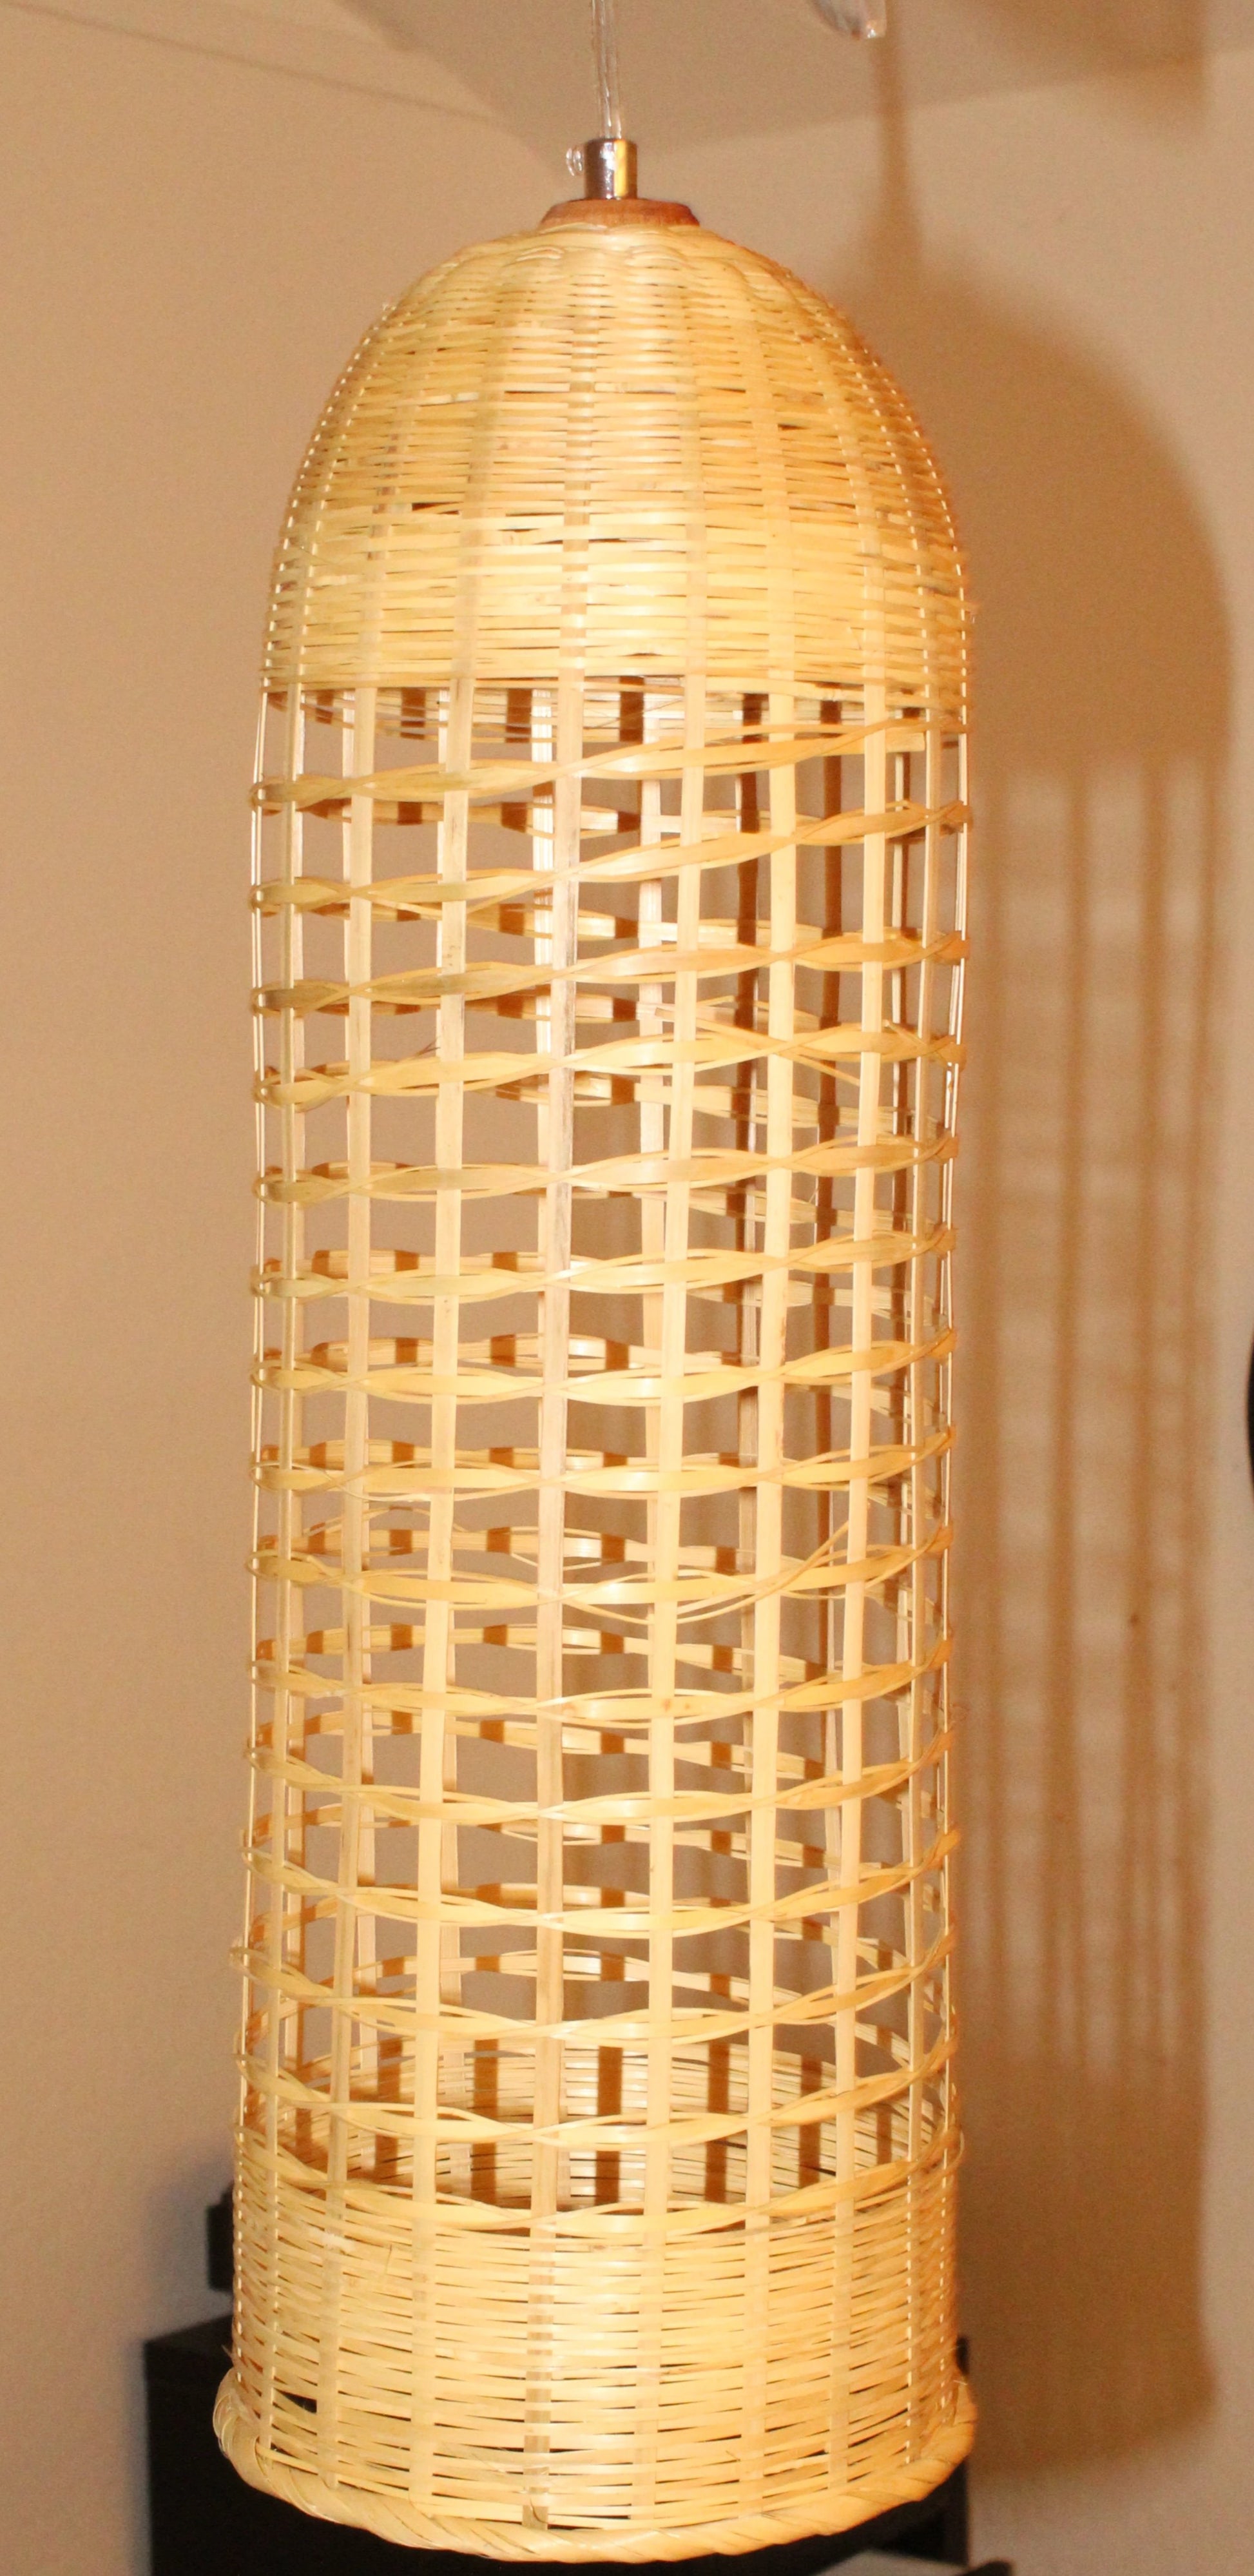 Bamboo Hand-Woven Cylinder Pendant Light By Artisan Living -Only Small Size Available-7